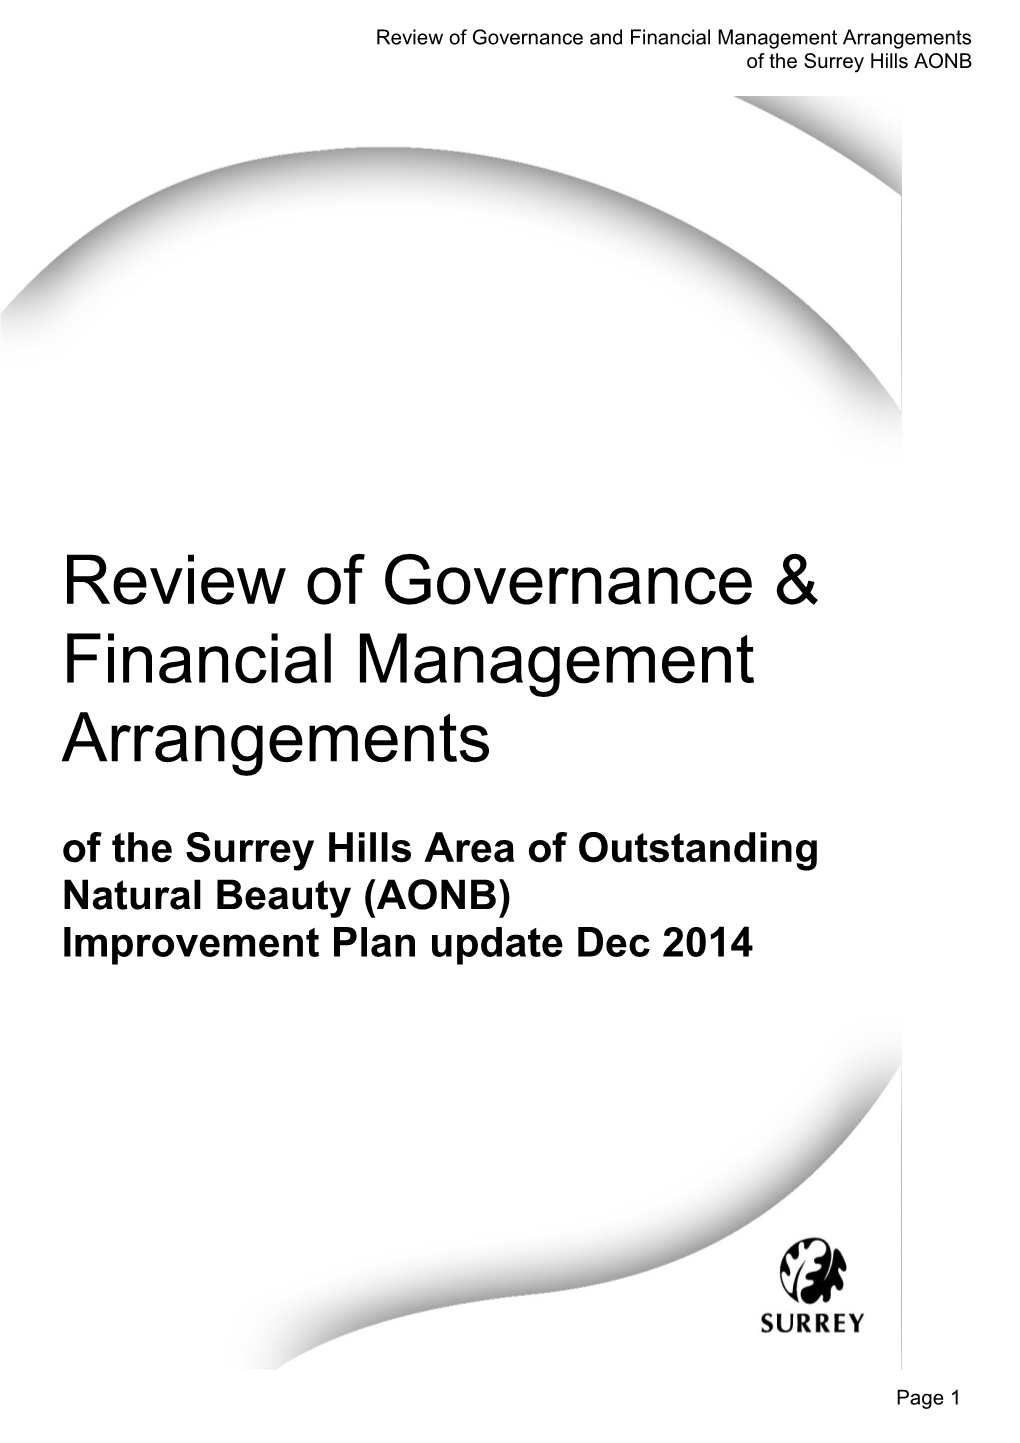 Review of Governance and Financial Management Arrangements